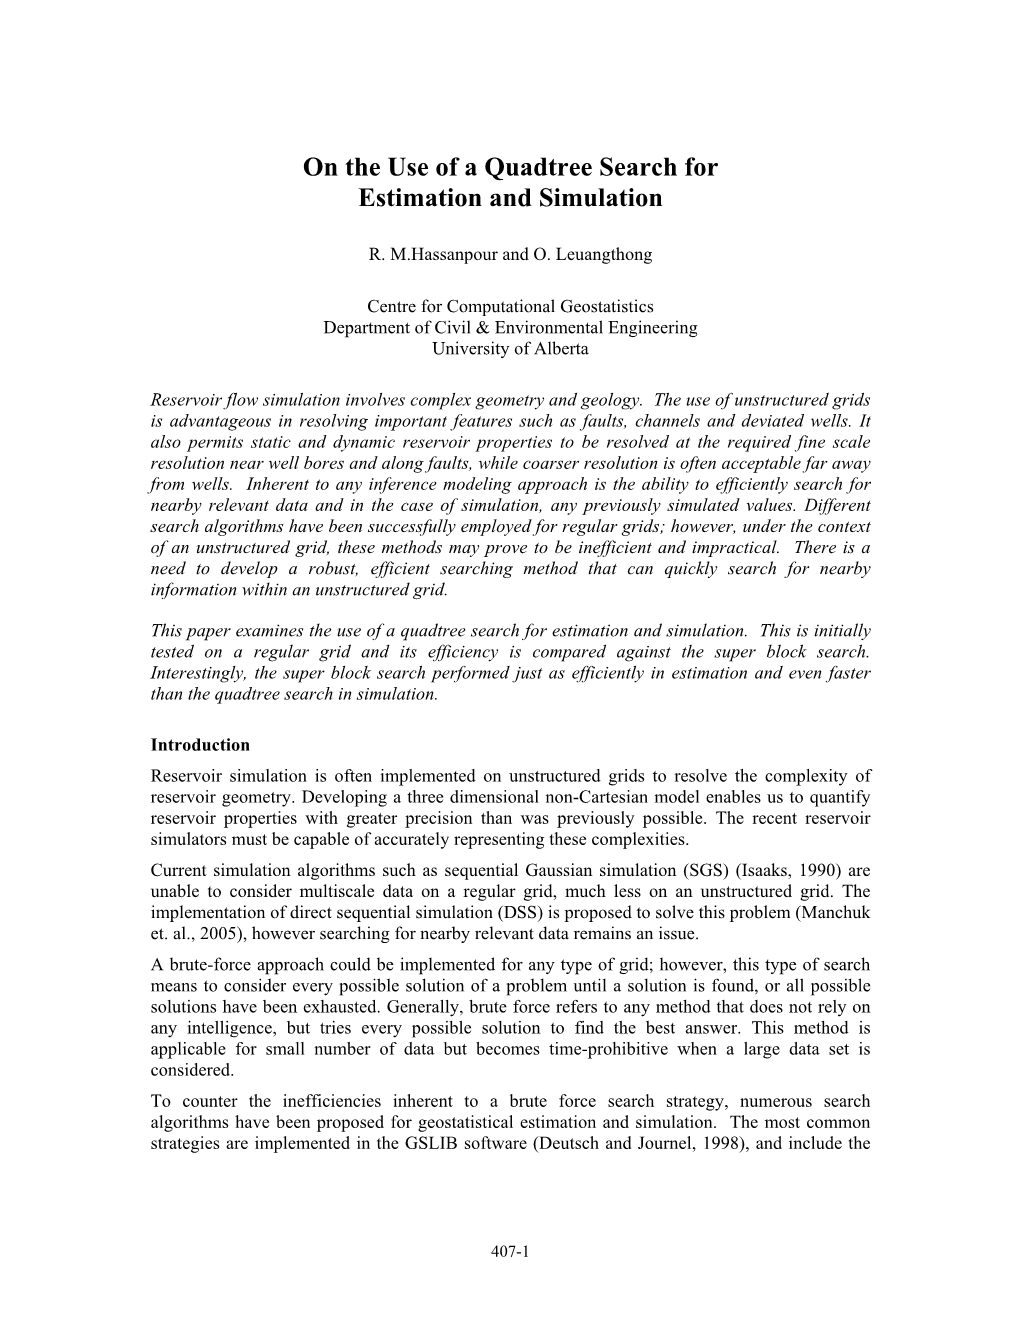 On the Use of a Quadtree Search for Estimation and Simulation